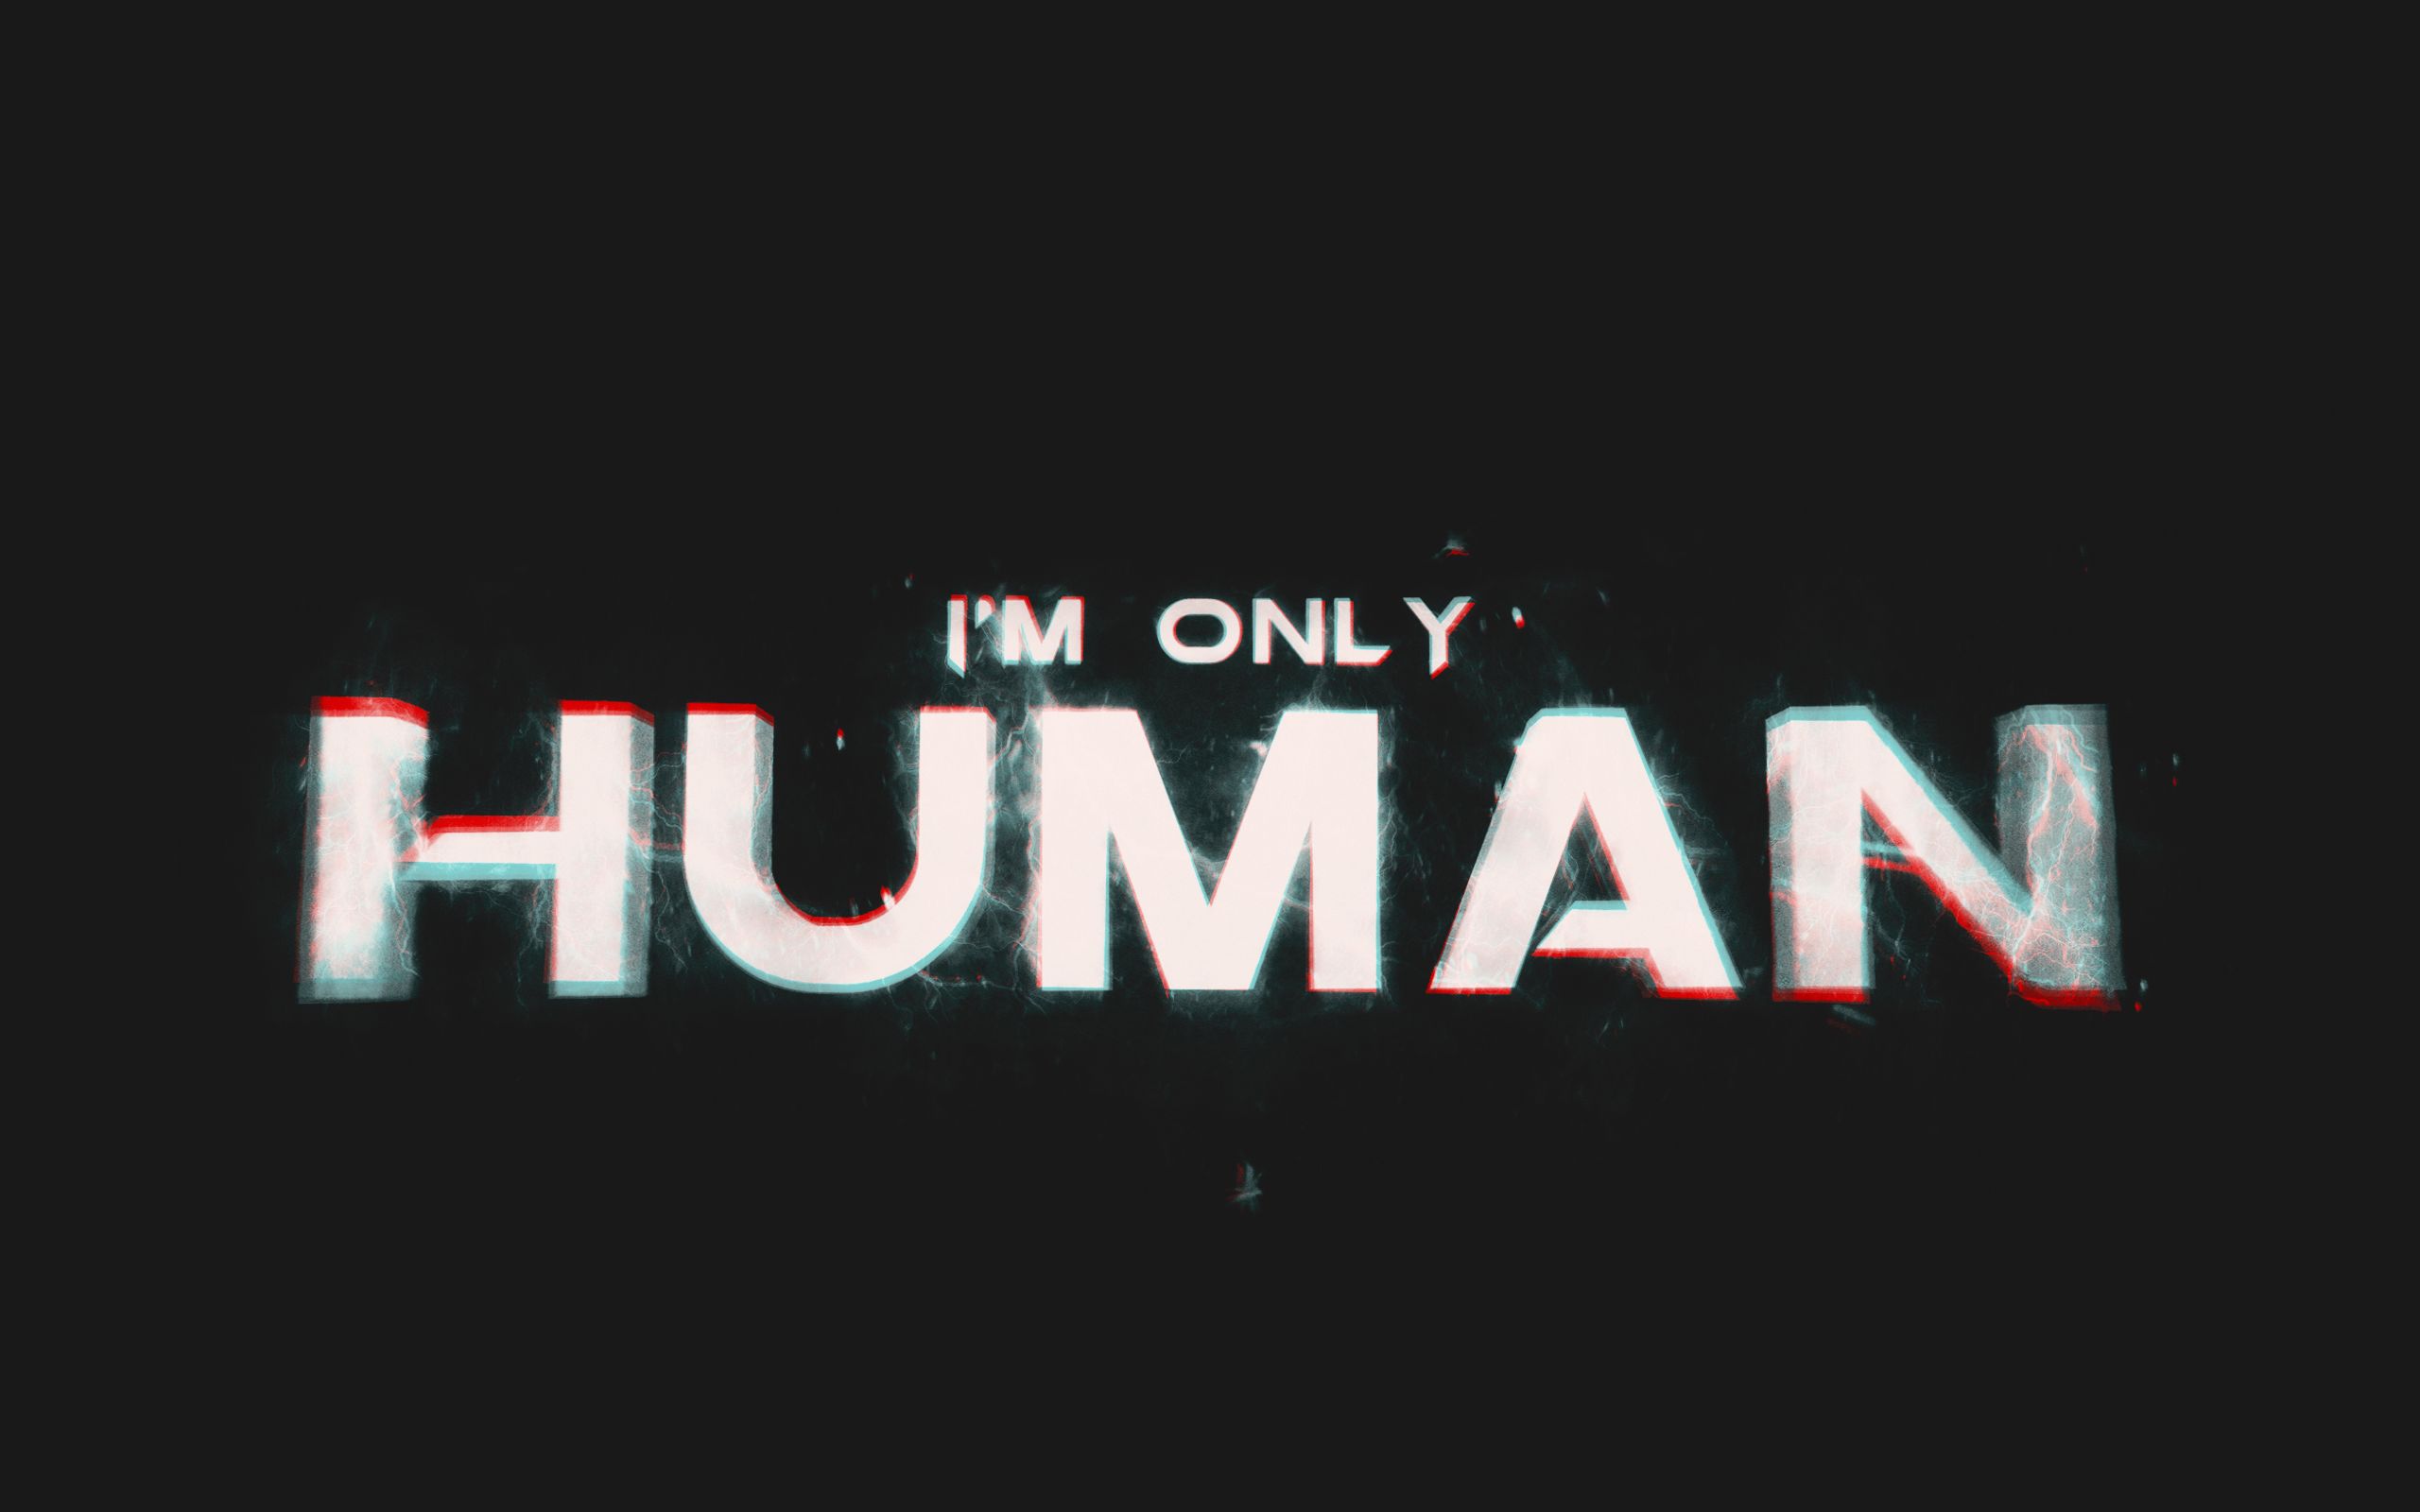 I m only your. I M only Human. Only Human. Only Human Todd Burns. Im only Human after all.